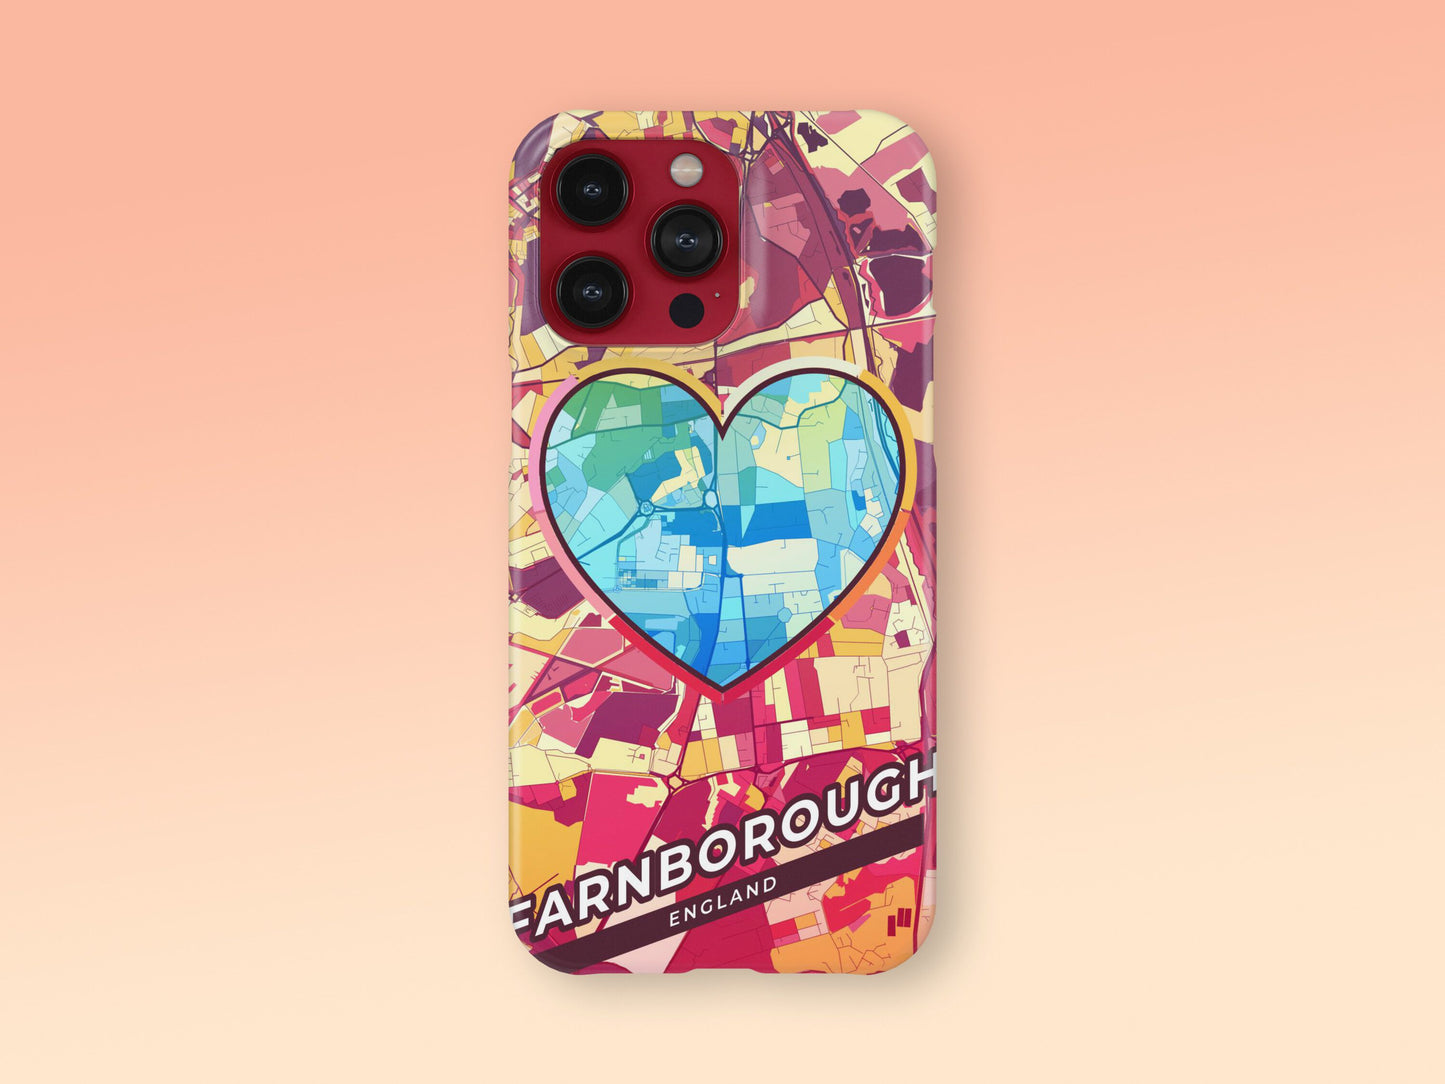 Farnborough England slim phone case with colorful icon. Birthday, wedding or housewarming gift. Couple match cases. 2